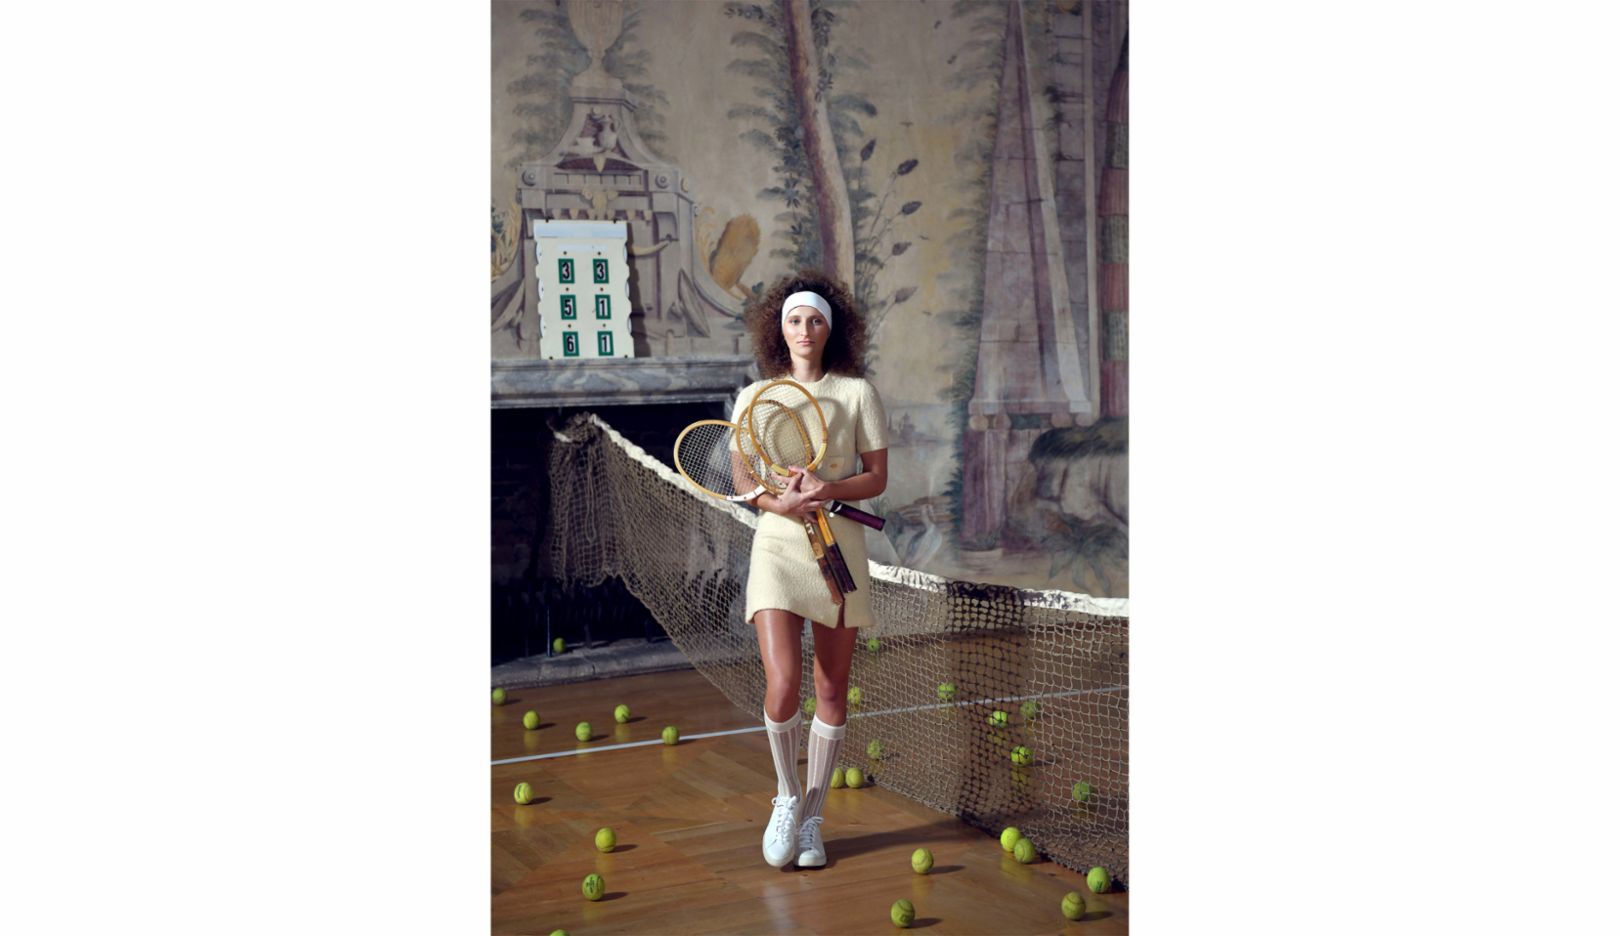 Castle fun. Due to the weather, it was clearly not a good day for an outdoor shoot. So Leitmeritz found Nebílovy Castle in the Czech Republic and transformed the ballroom into a tennis court for Markéta Vondroušová. “I imagined her living in the castle and wanted to capture a picture full of nostalgia. We had a lot of fun with Markéta hitting balls over the net on the parquet flooring. For me, her face is like a work of art by a Dutch painter.”  